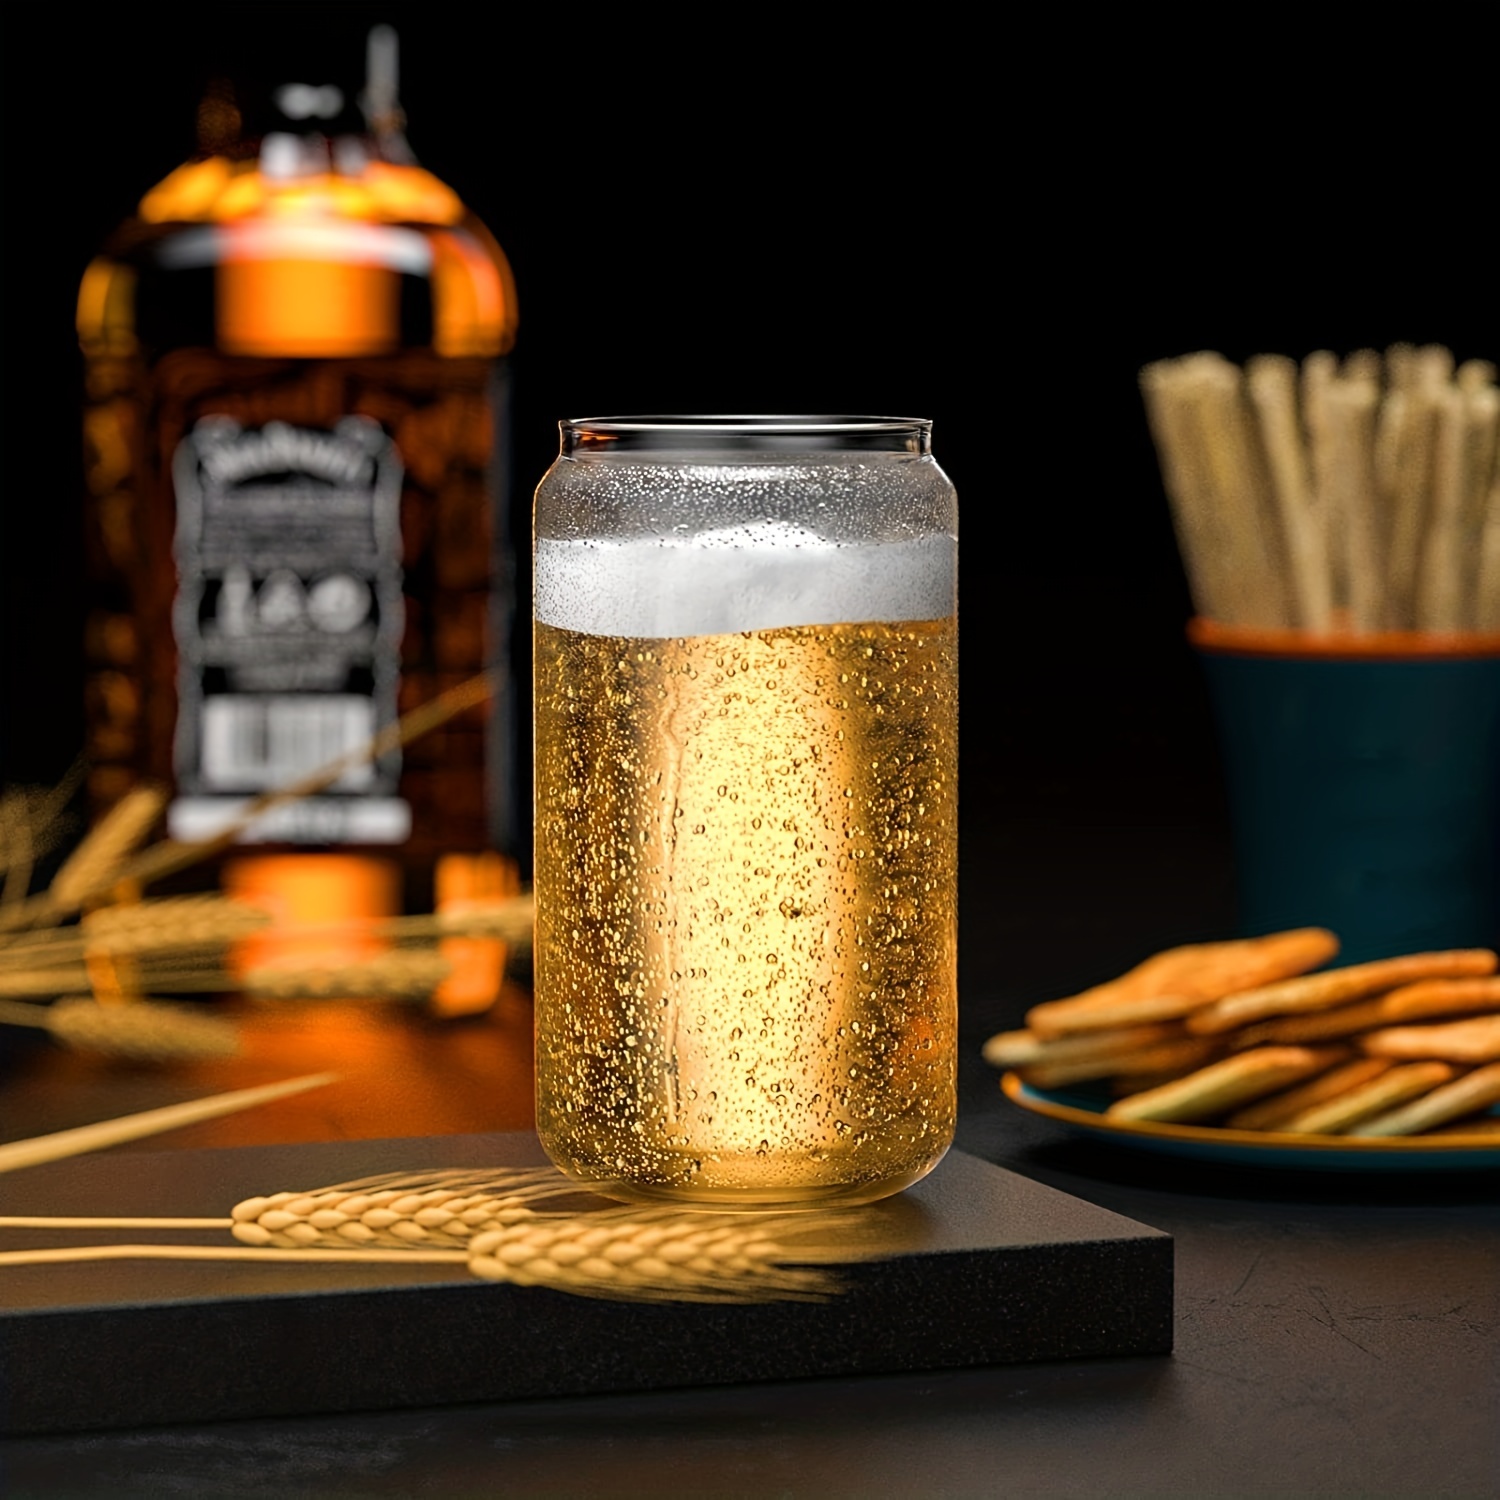 16oz Beer Can Glass with Bamboo Lids and Glass Straws,6pcs Drinking Glasses Can Shaped Glass Cups, Beer Glasses, Glass Coffee Cups, Wine, Cocktail